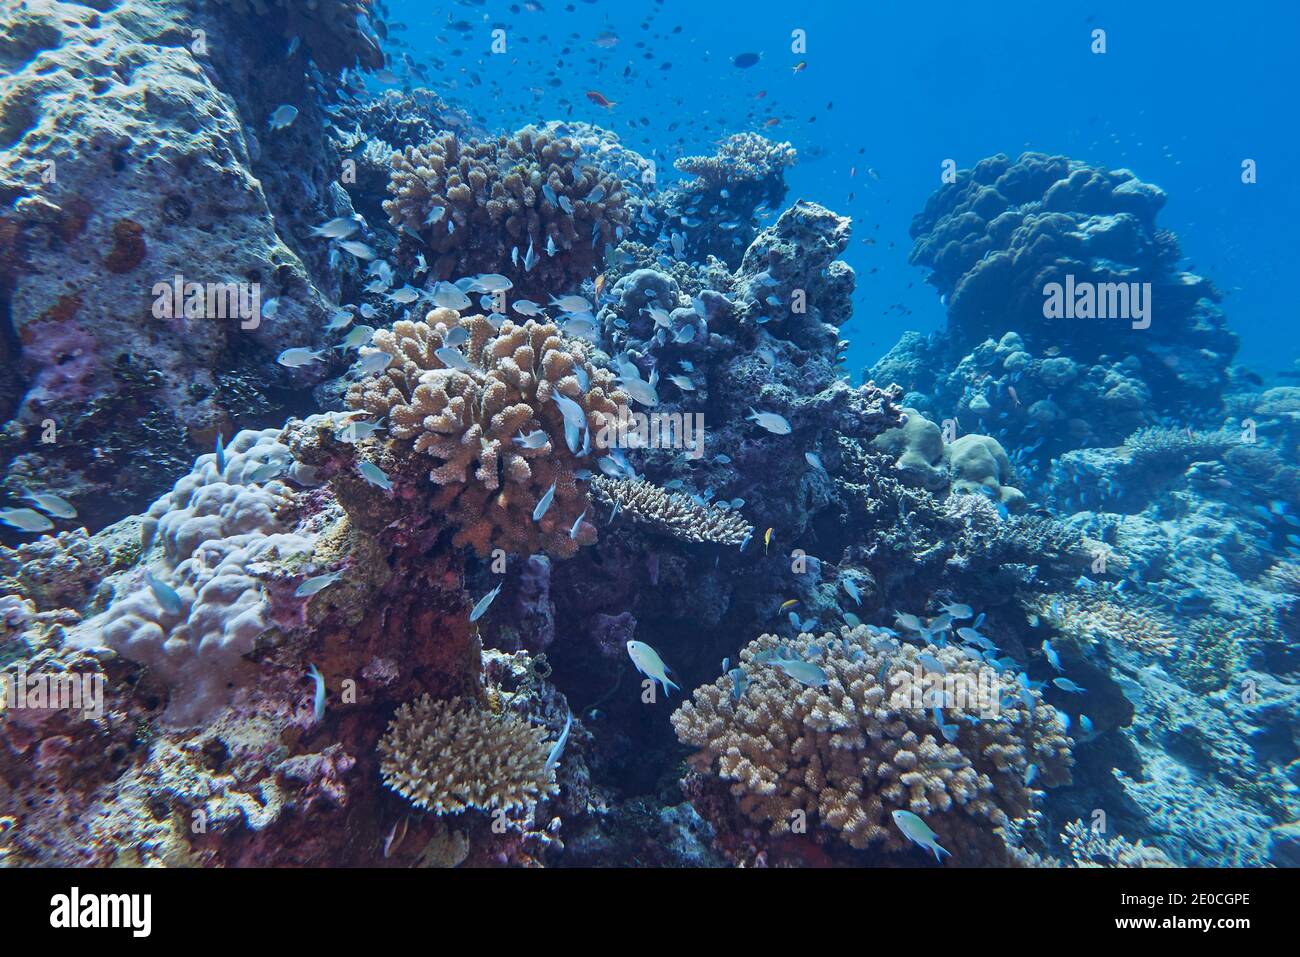 Small reef fish crowd around outcrops of Pocillopora species hard corals, a coral reef in Gaafu Dhaalu atoll, The Maldives, Indian Ocean, Asia Stock Photo